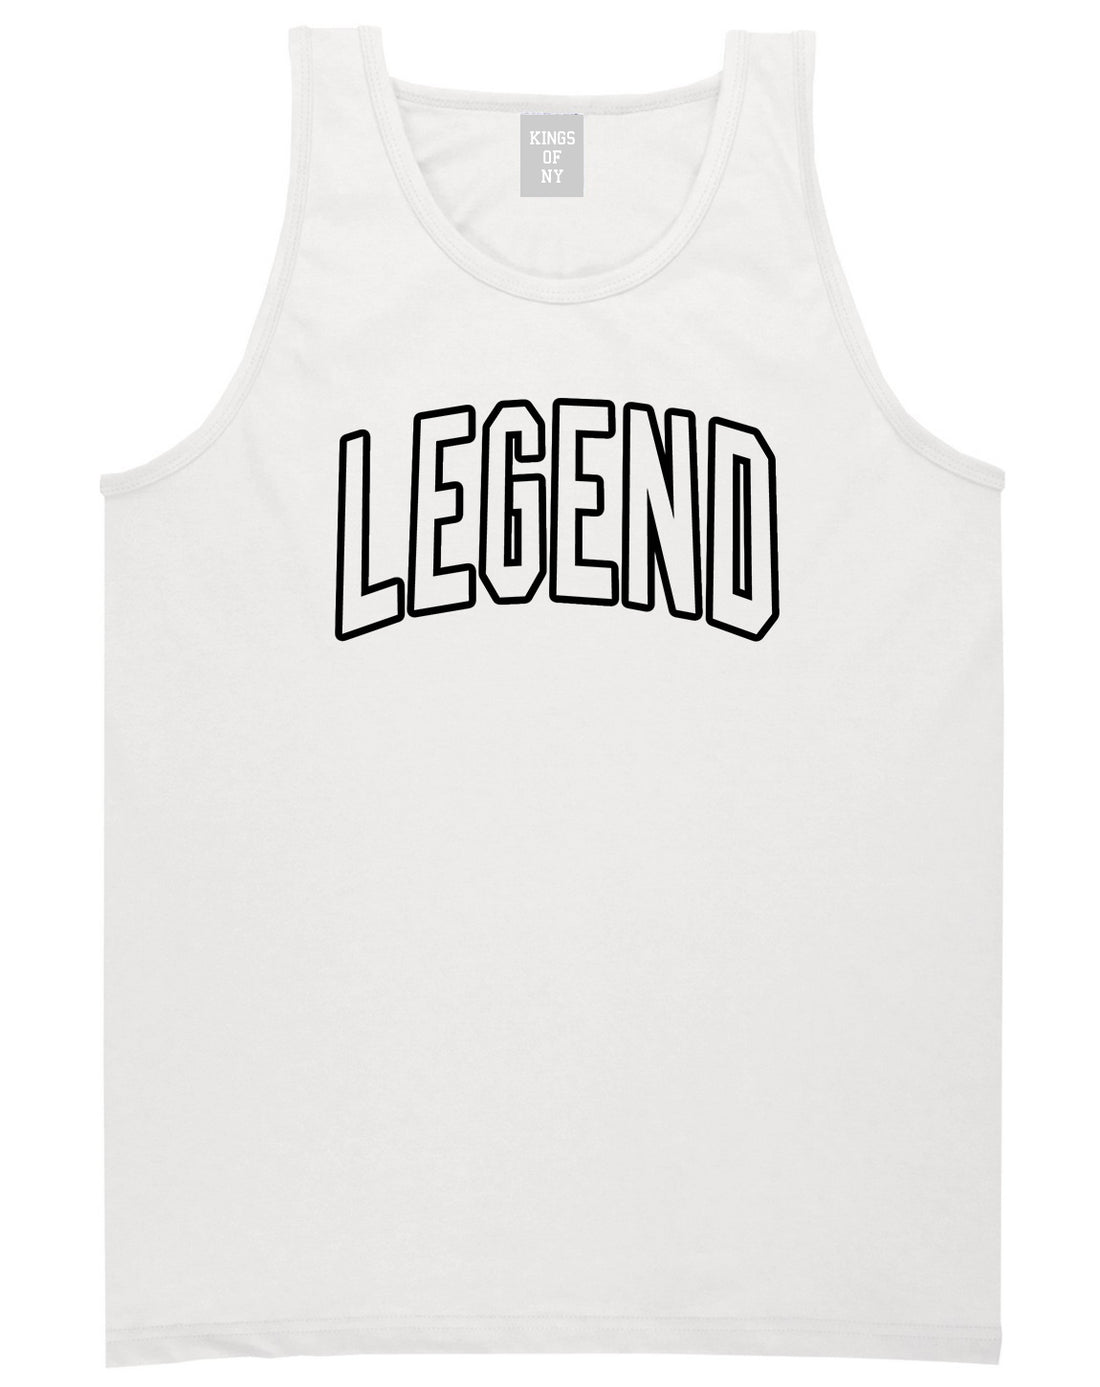 Legend Outline Mens Tank Top Shirt White by Kings Of NY